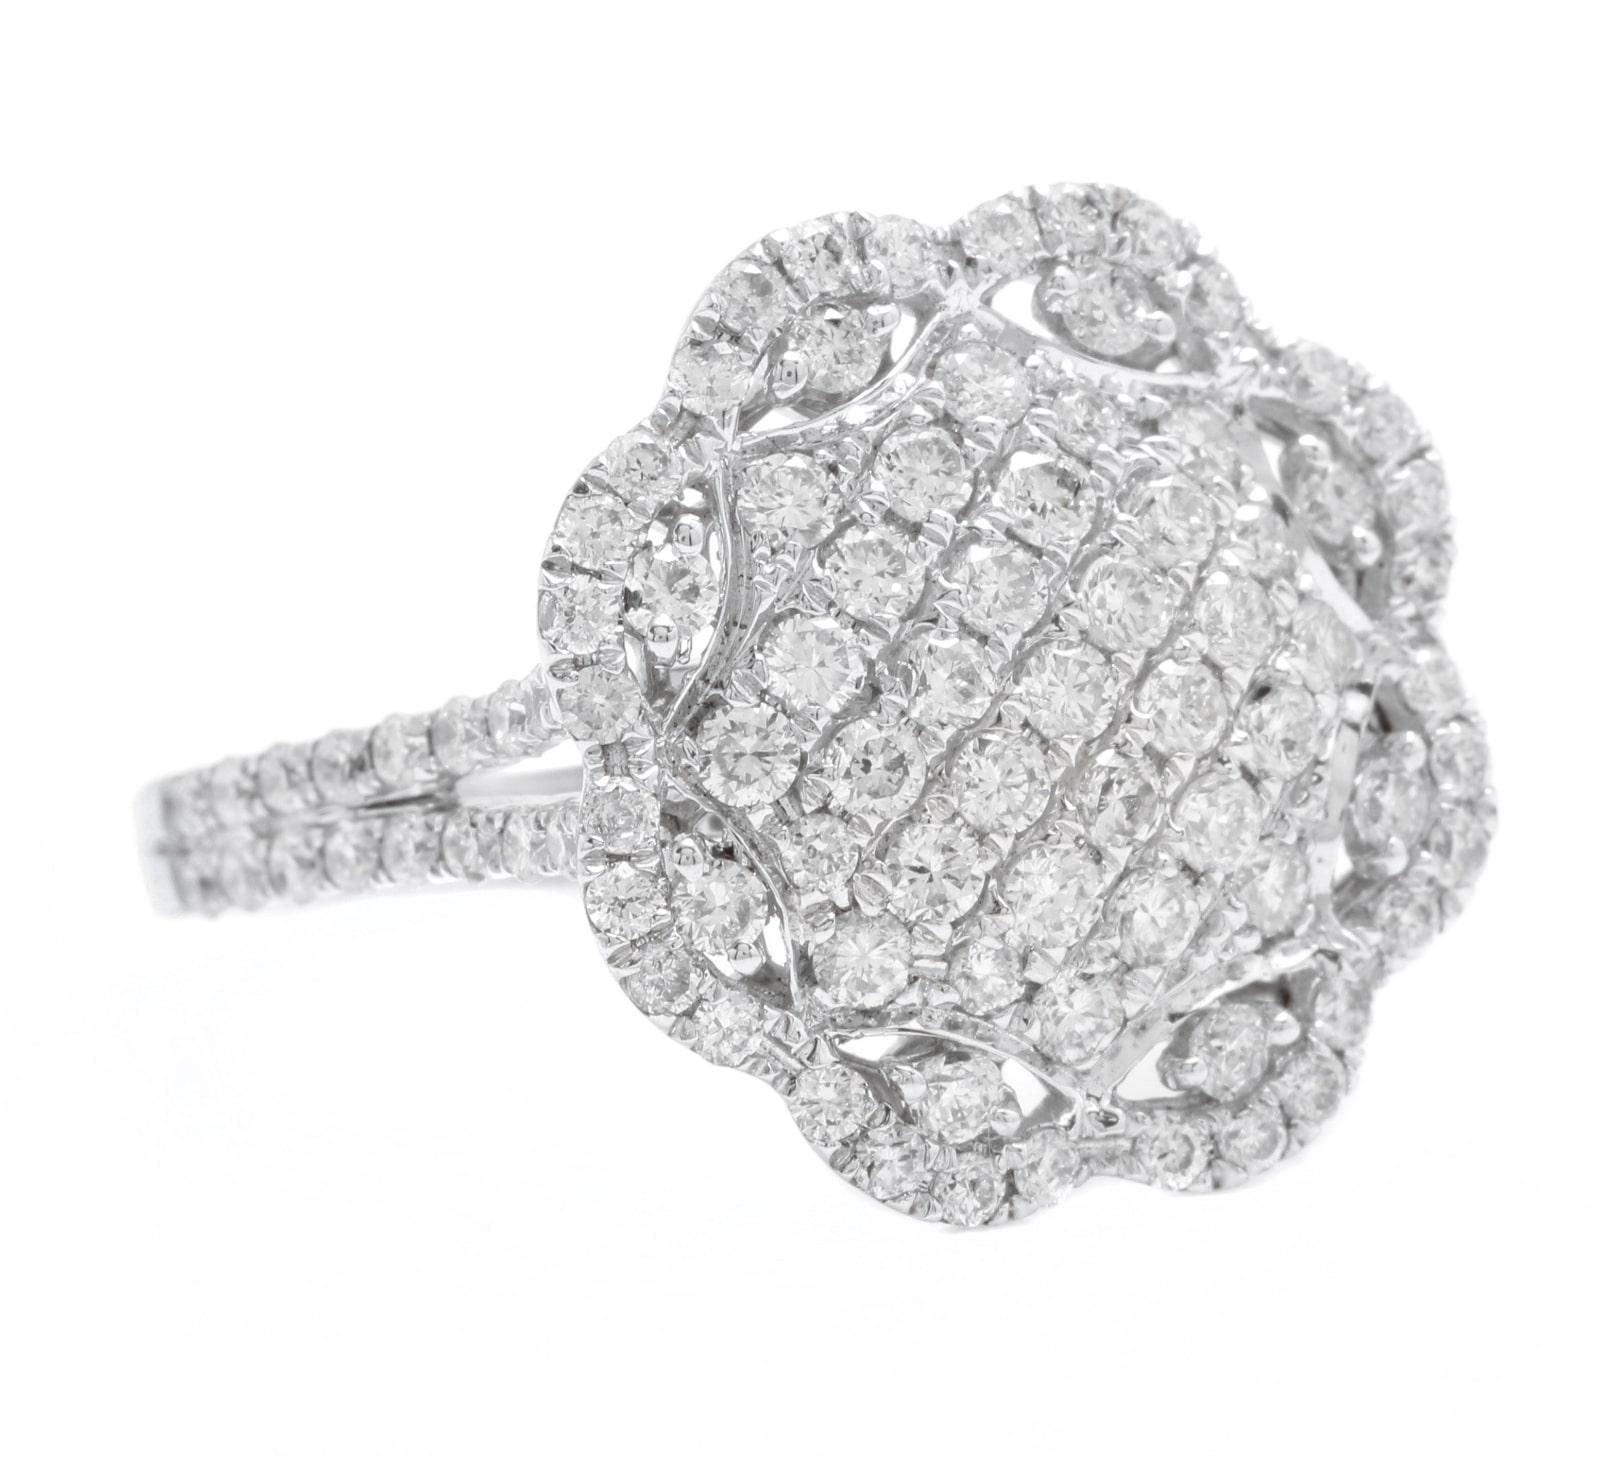 Splendid 1.38 Carats Natural Diamond 14K Solid White Gold Ring

Stamped: G585 (14K)

Total Natural Round Cut Diamonds Weight: 1.38 Carats (color H-I / Clarity SI1-SI2)

The width of the ring is: 17.20mm

Ring size: 7 (we offer free re-sizing upon